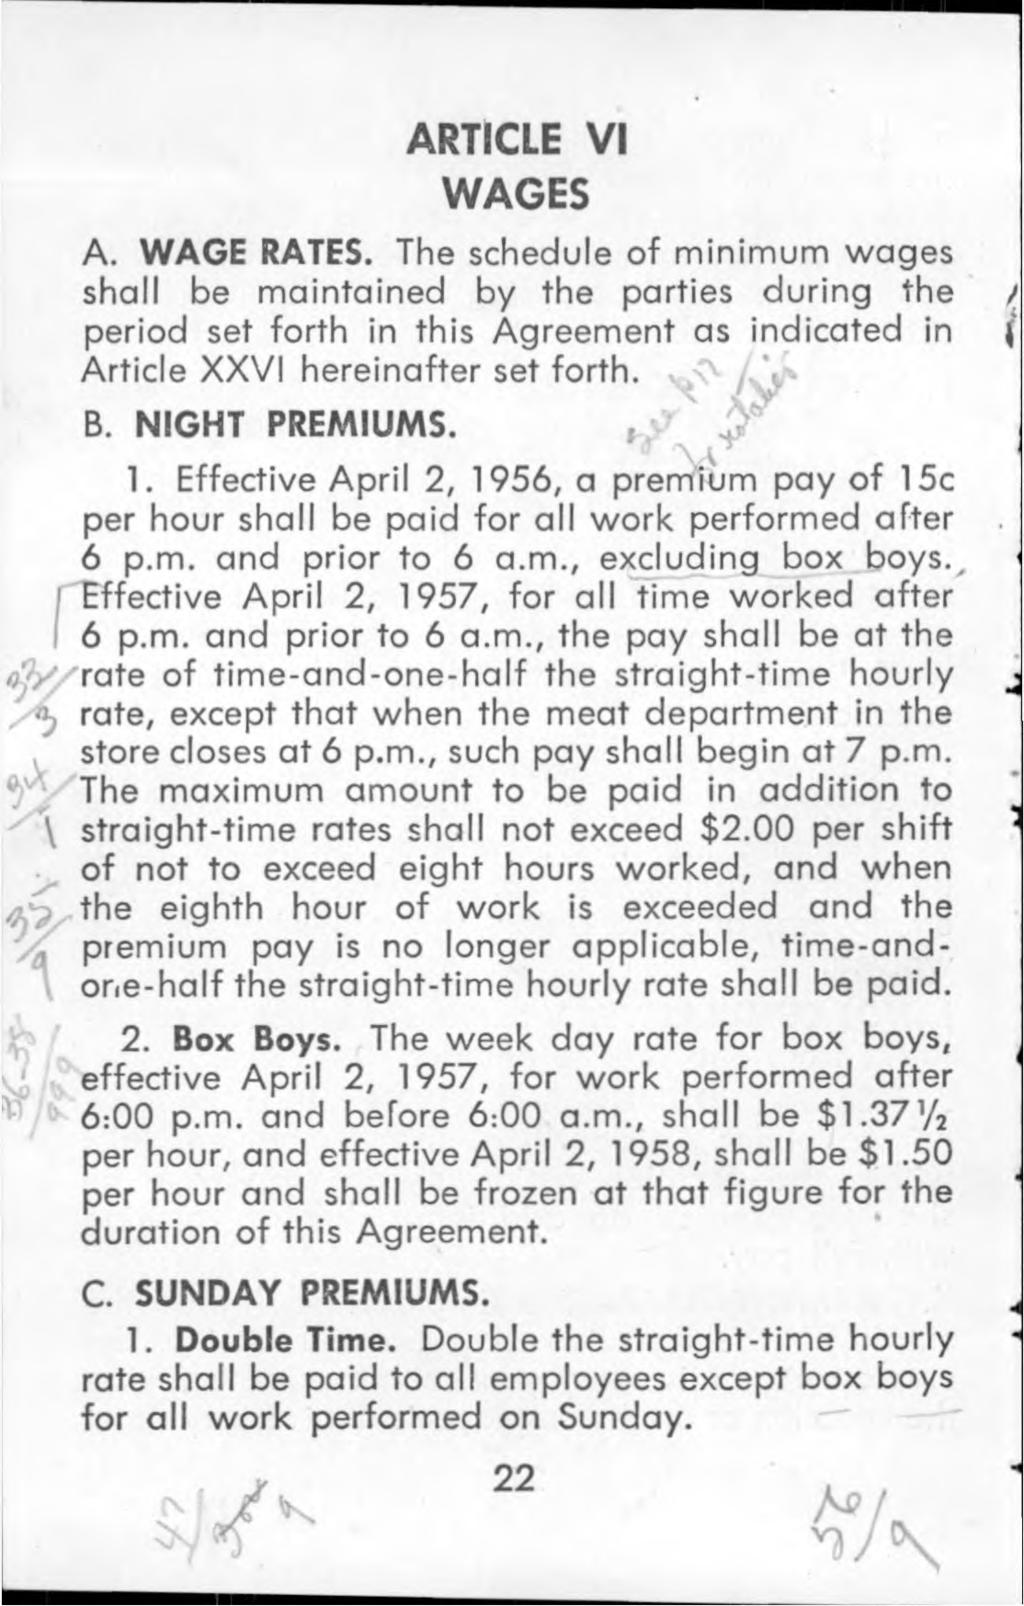 ARTICLE VI WAGES A. WAGE RATES. The schedule o f m inim um wages shall be m aintained by the parties during the period set forth in this Agreement as indicated in Article XXVI hereinafter set forth.